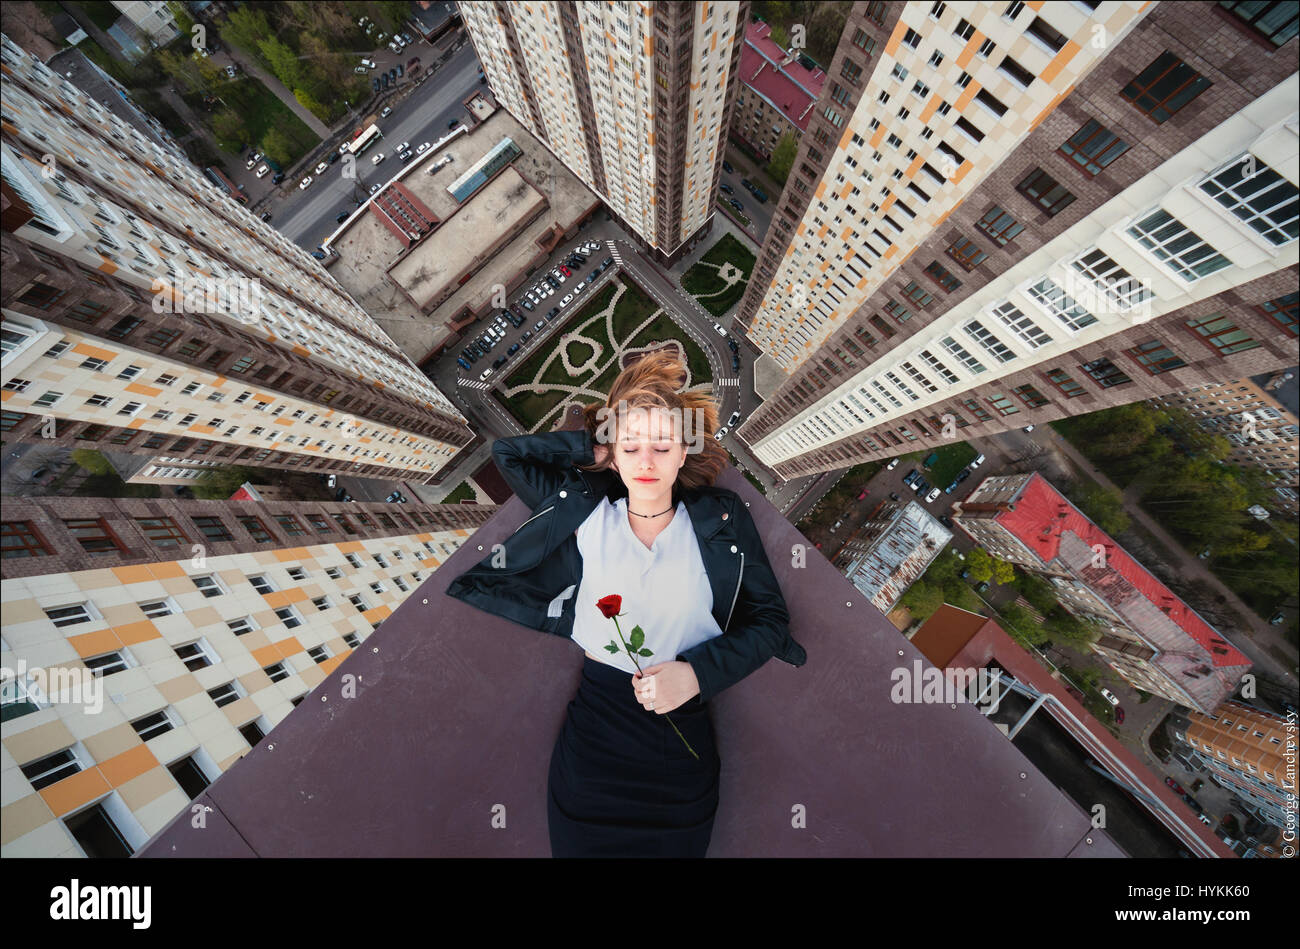 Moscow. VERTIGO inducing pictures from the top of a 155-foot-high crane have been captured by a photographer in bid to overcome his fear of heights. The amazing aerial images show the photographer and his friends throw caution to the wind as they precariously perch high above the cities with no safety equipment. Other shots capture the adventurous bunch in the middle of climbs up cranes and beautiful women posing on the edge of roof tops. The extreme photos were taken by Moscow photographer and acrophobic George Lanchevsky (24) in cities around the world including Moscow, Galich and Hong Kong. Stock Photo